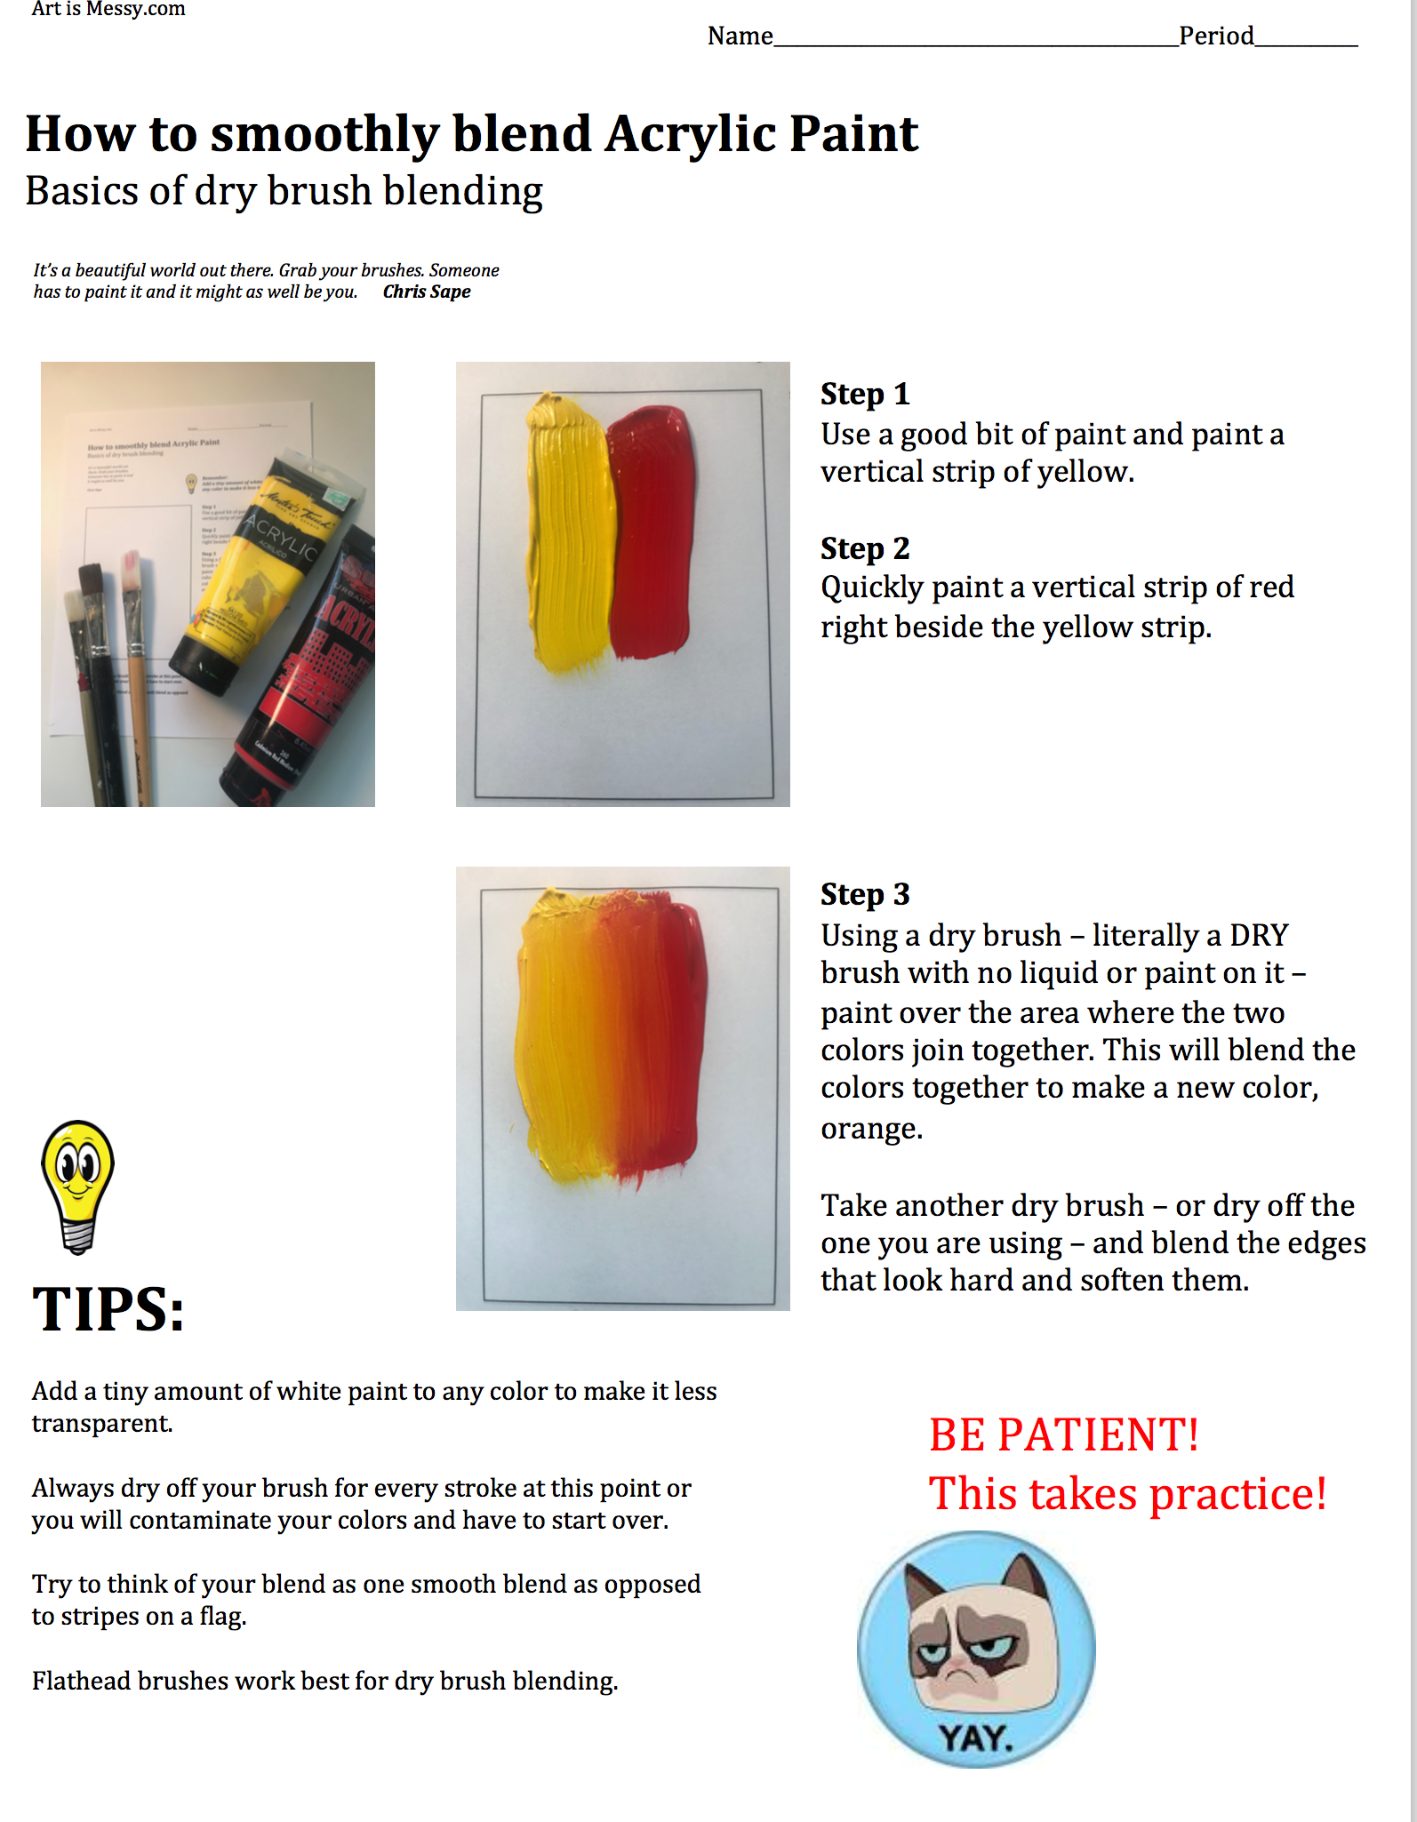 How to blend Acrylic Paint - Art Lesson